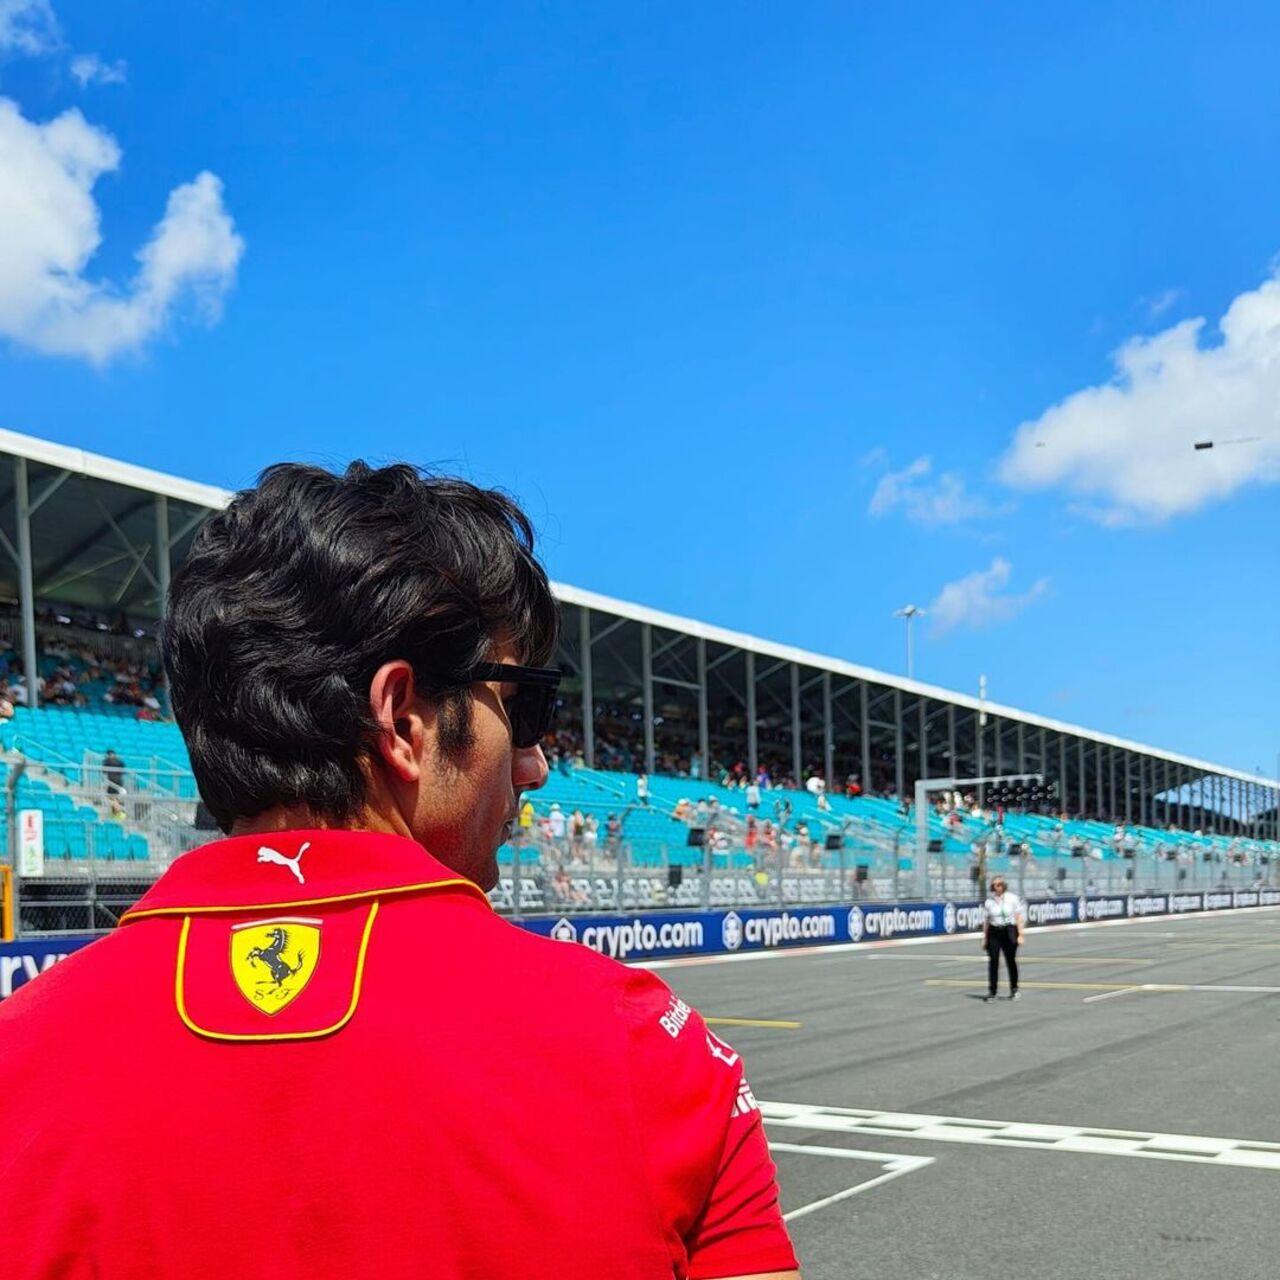 Star kid Ibrahim Ali Khan recently attended the Miami Grand Prix in Florida, where he met with F1 racer Charles Leclerc.